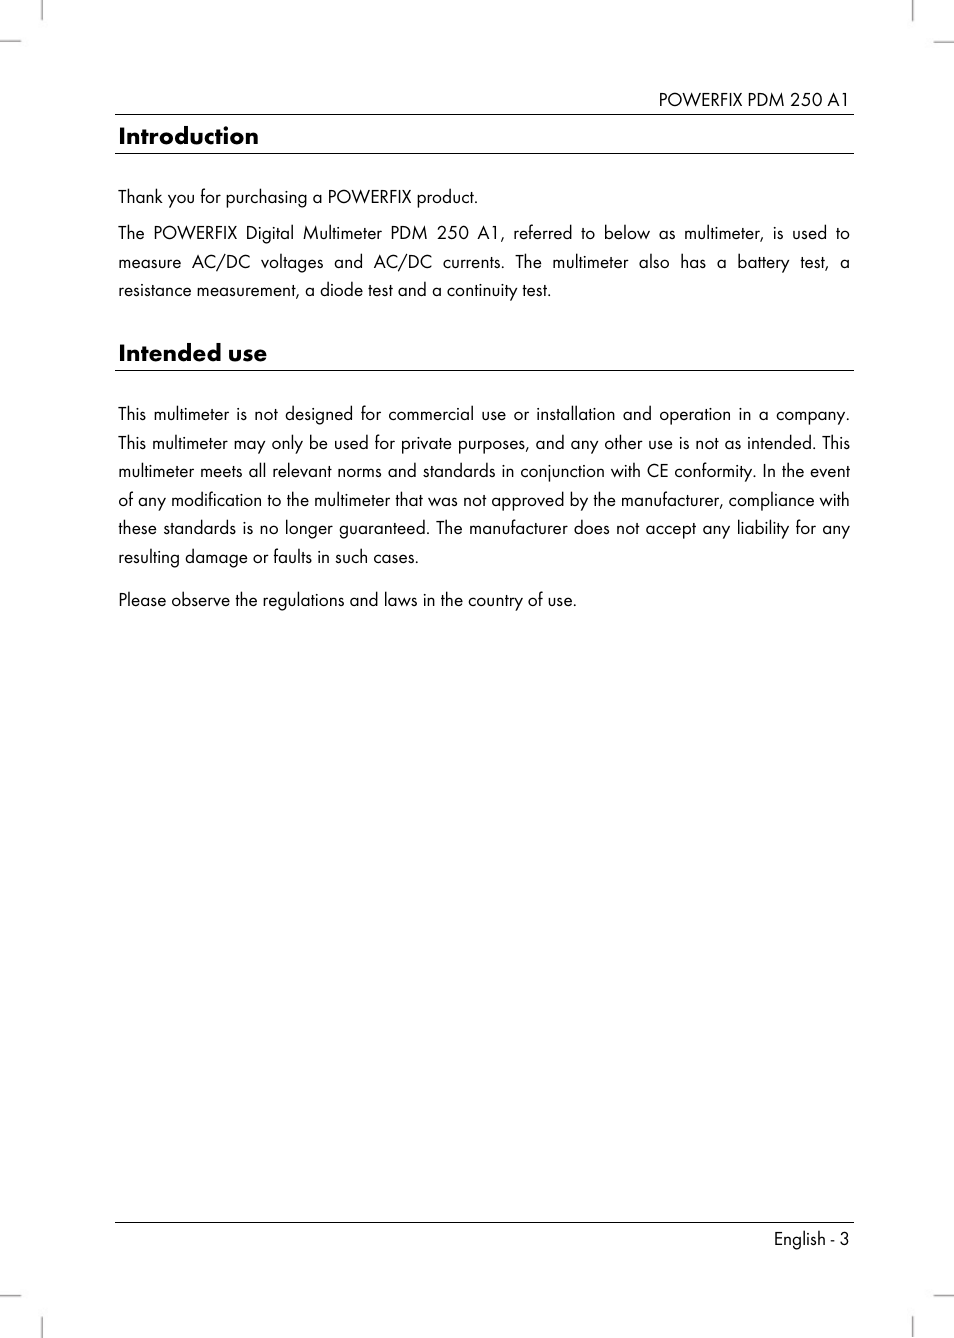 Introduction, Intended use | Powerfix PDM 250 A1 User Manual | Page 5 / 108